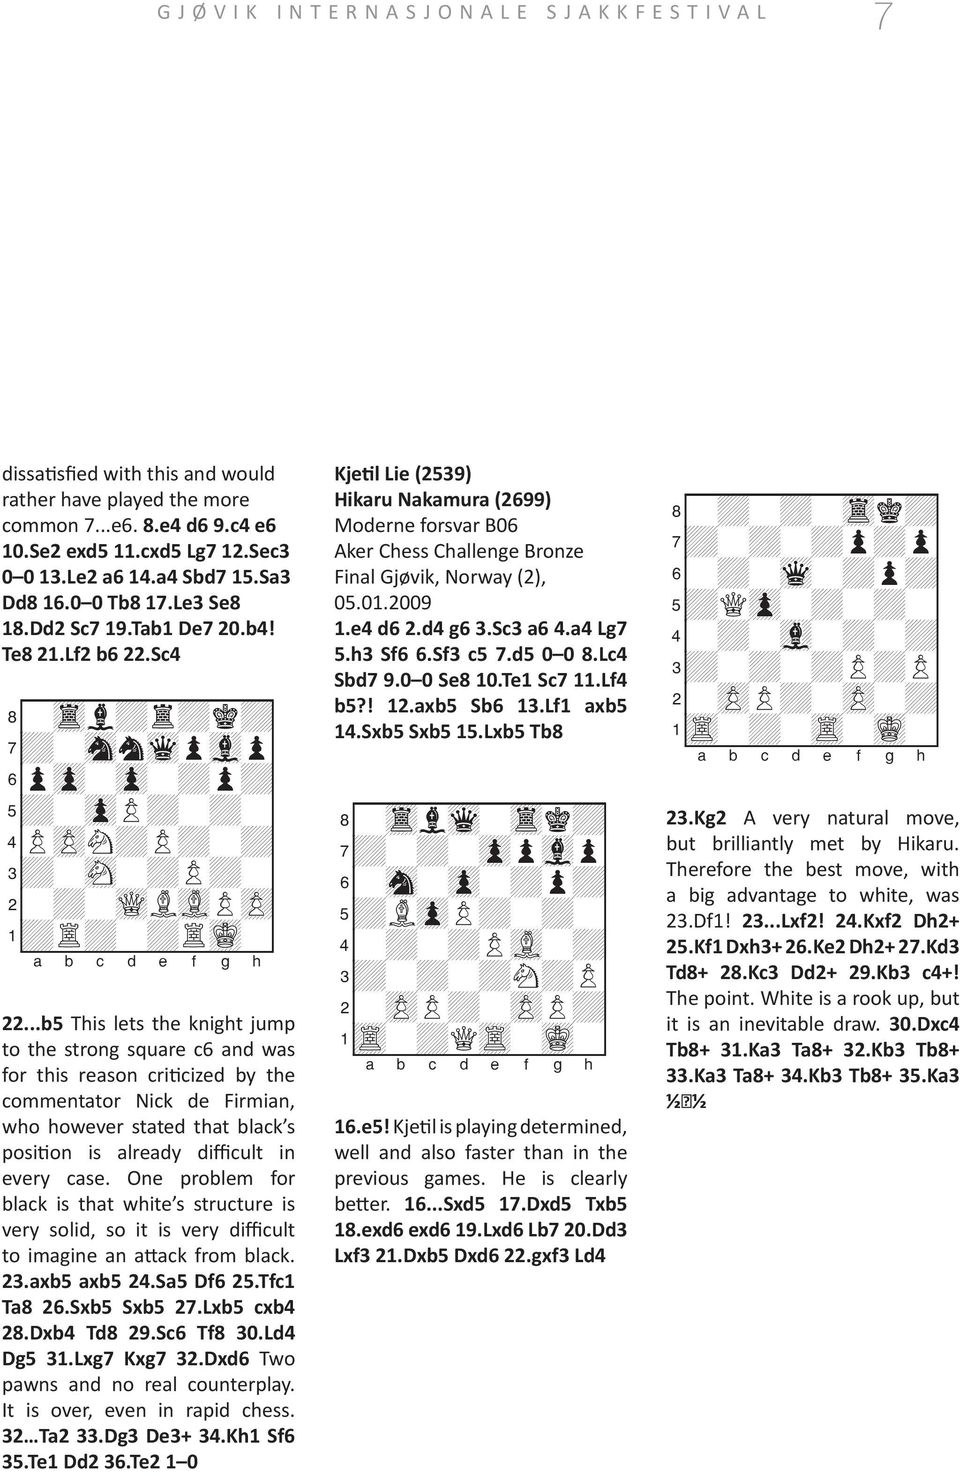 ..b5 This lets the knight jump to the strong square c6 and was for this reason criticized by the commentator Nick de Firmian, who however stated that black s position is already difficult in every case.